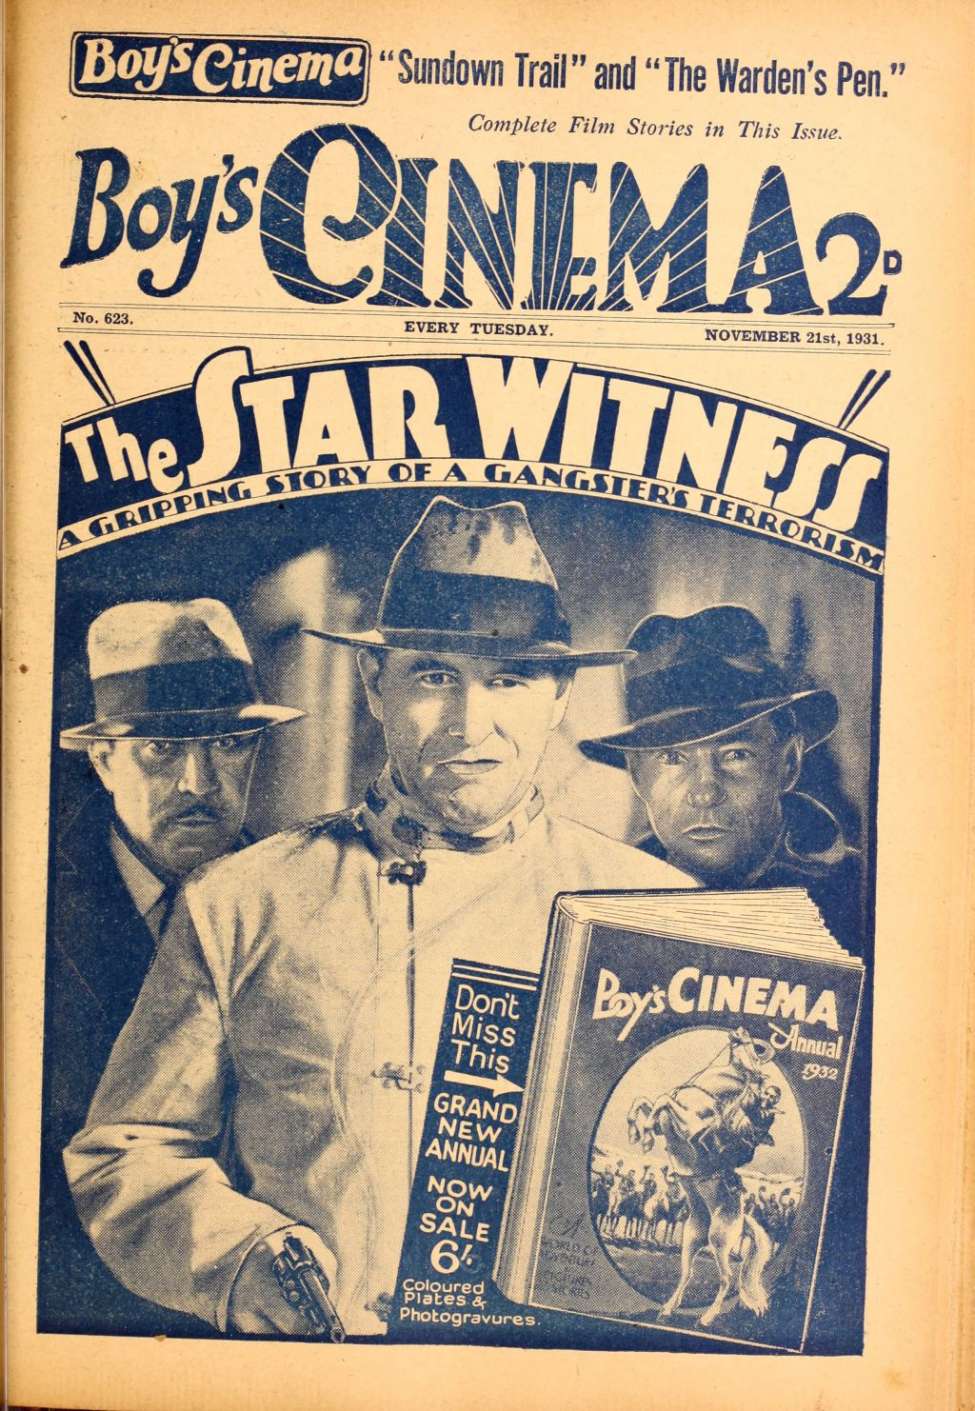 Comic Book Cover For Boy's Cinema 623 - The Star Witness - Charles (Chic) Sale